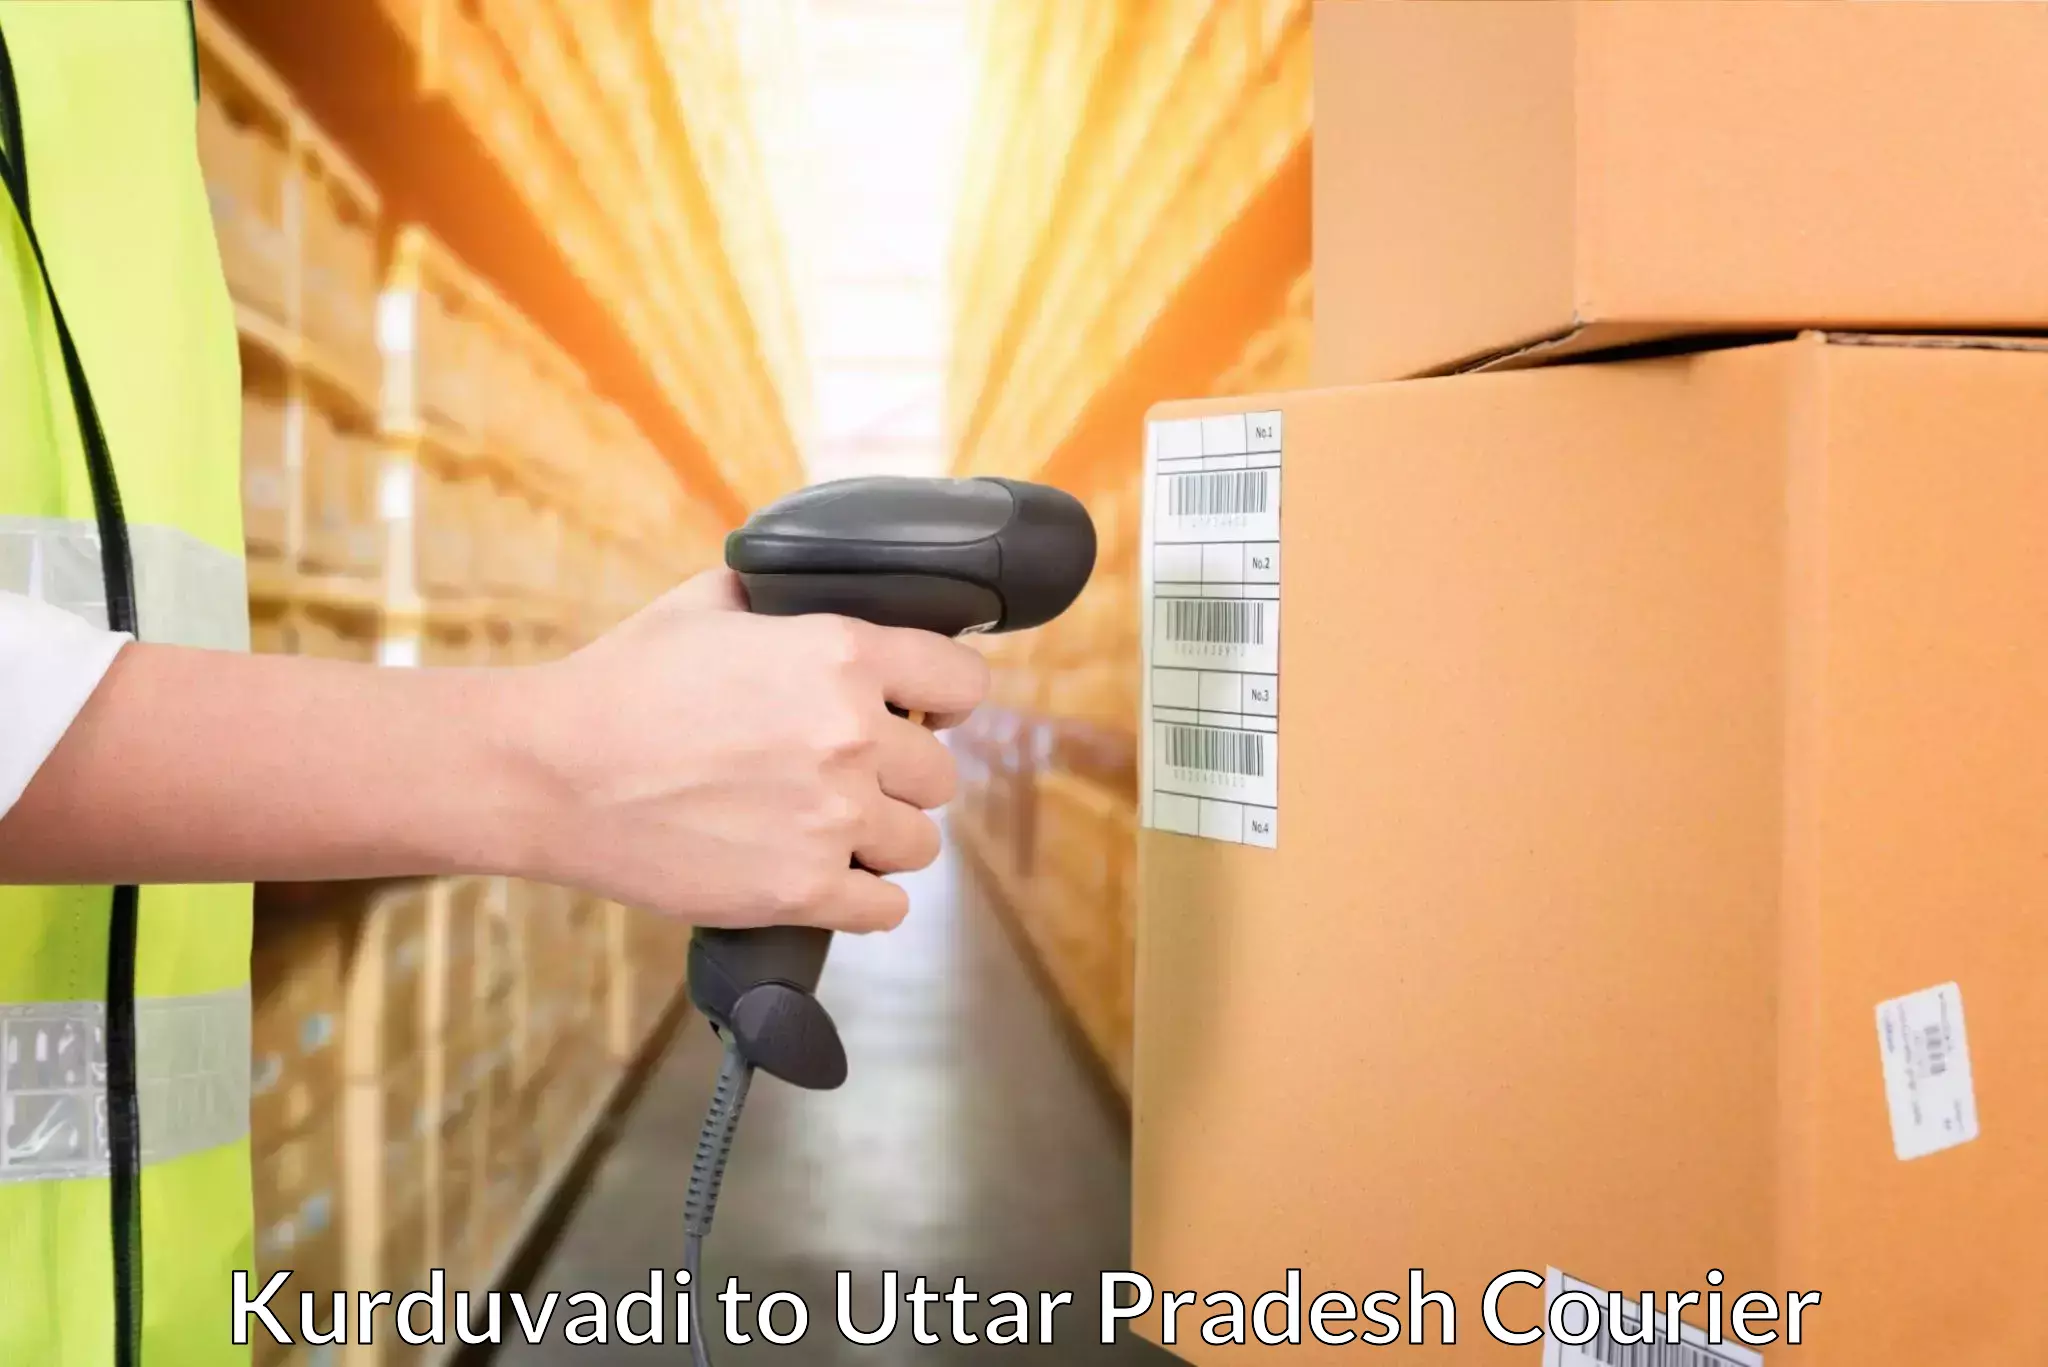 State-of-the-art courier technology in Kurduvadi to Noida